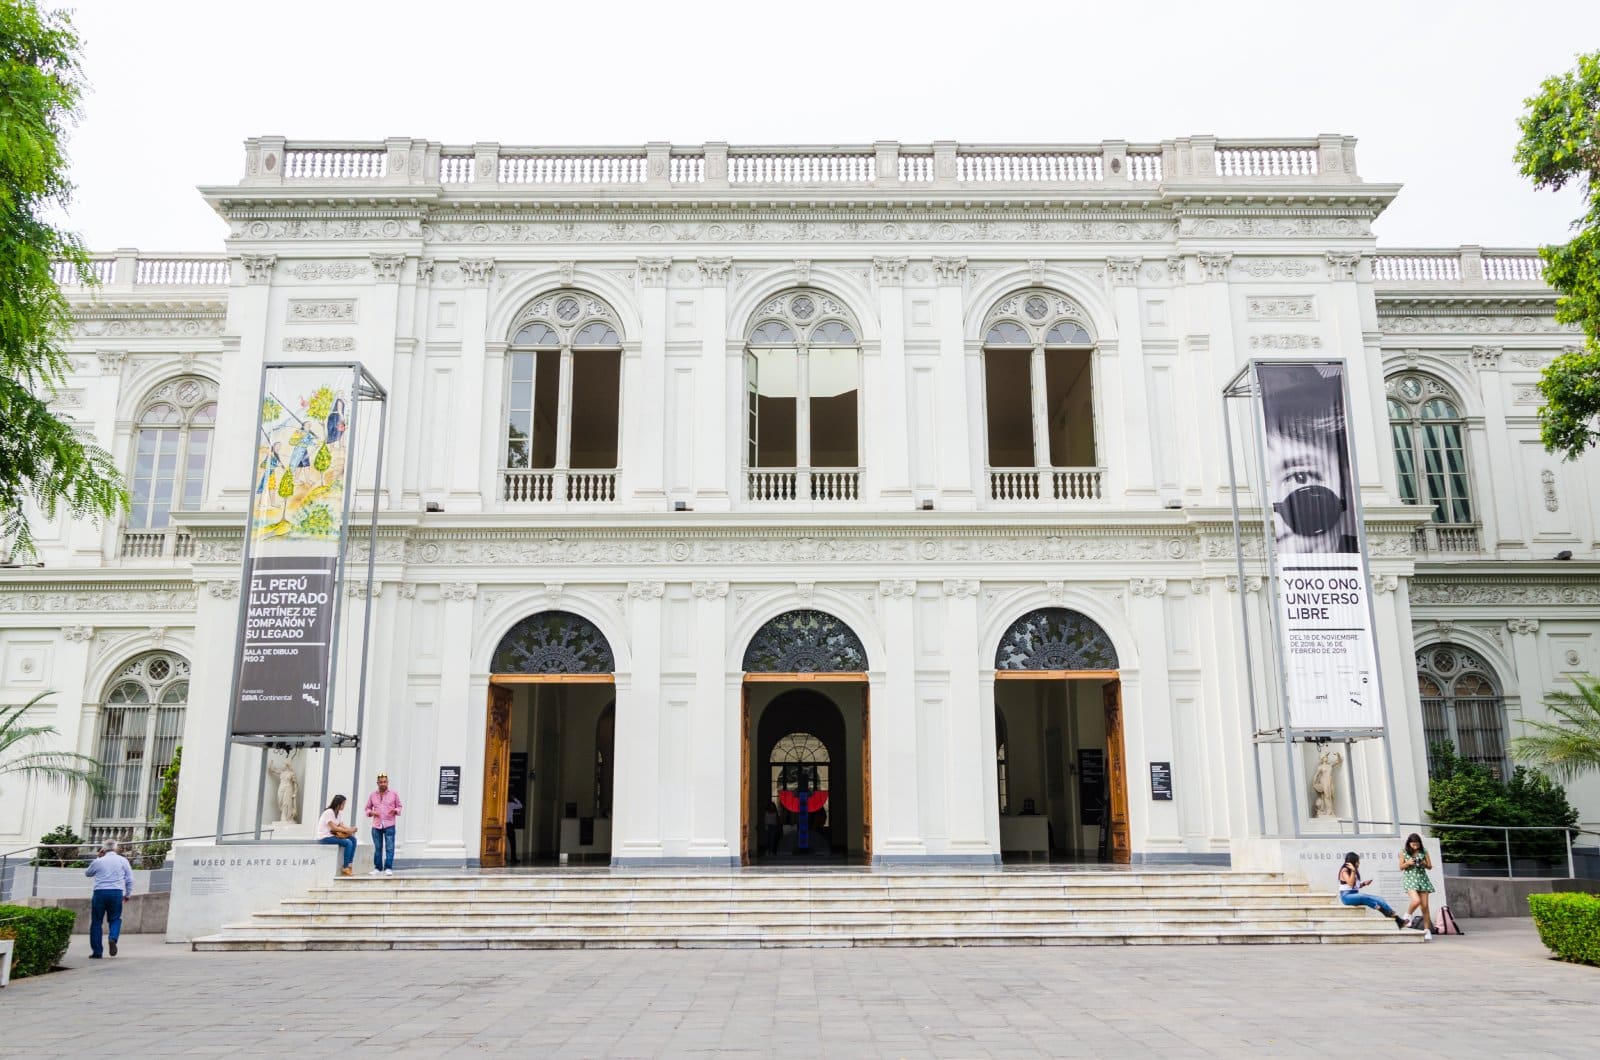 <p class="wp-caption-text">Image Credit: Shutterstock / Peruphotart</p>  <p><span>The Museo de Arte de Lima, commonly known as MALI, presents a vast collection of Peruvian art, from pre-Columbian artifacts to contemporary works. Housed in a striking Beaux-Arts building, the museum offers a comprehensive overview of Peru’s artistic heritage, including textiles, pottery, paintings, and sculptures.</span></p> <p><span>MALI’s temporary exhibitions often feature international artists, providing a global context to the museum’s predominantly Peruvian collection. The museum also hosts workshops, film screenings, and cultural events, making it a vibrant center for the arts in Lima.</span></p>